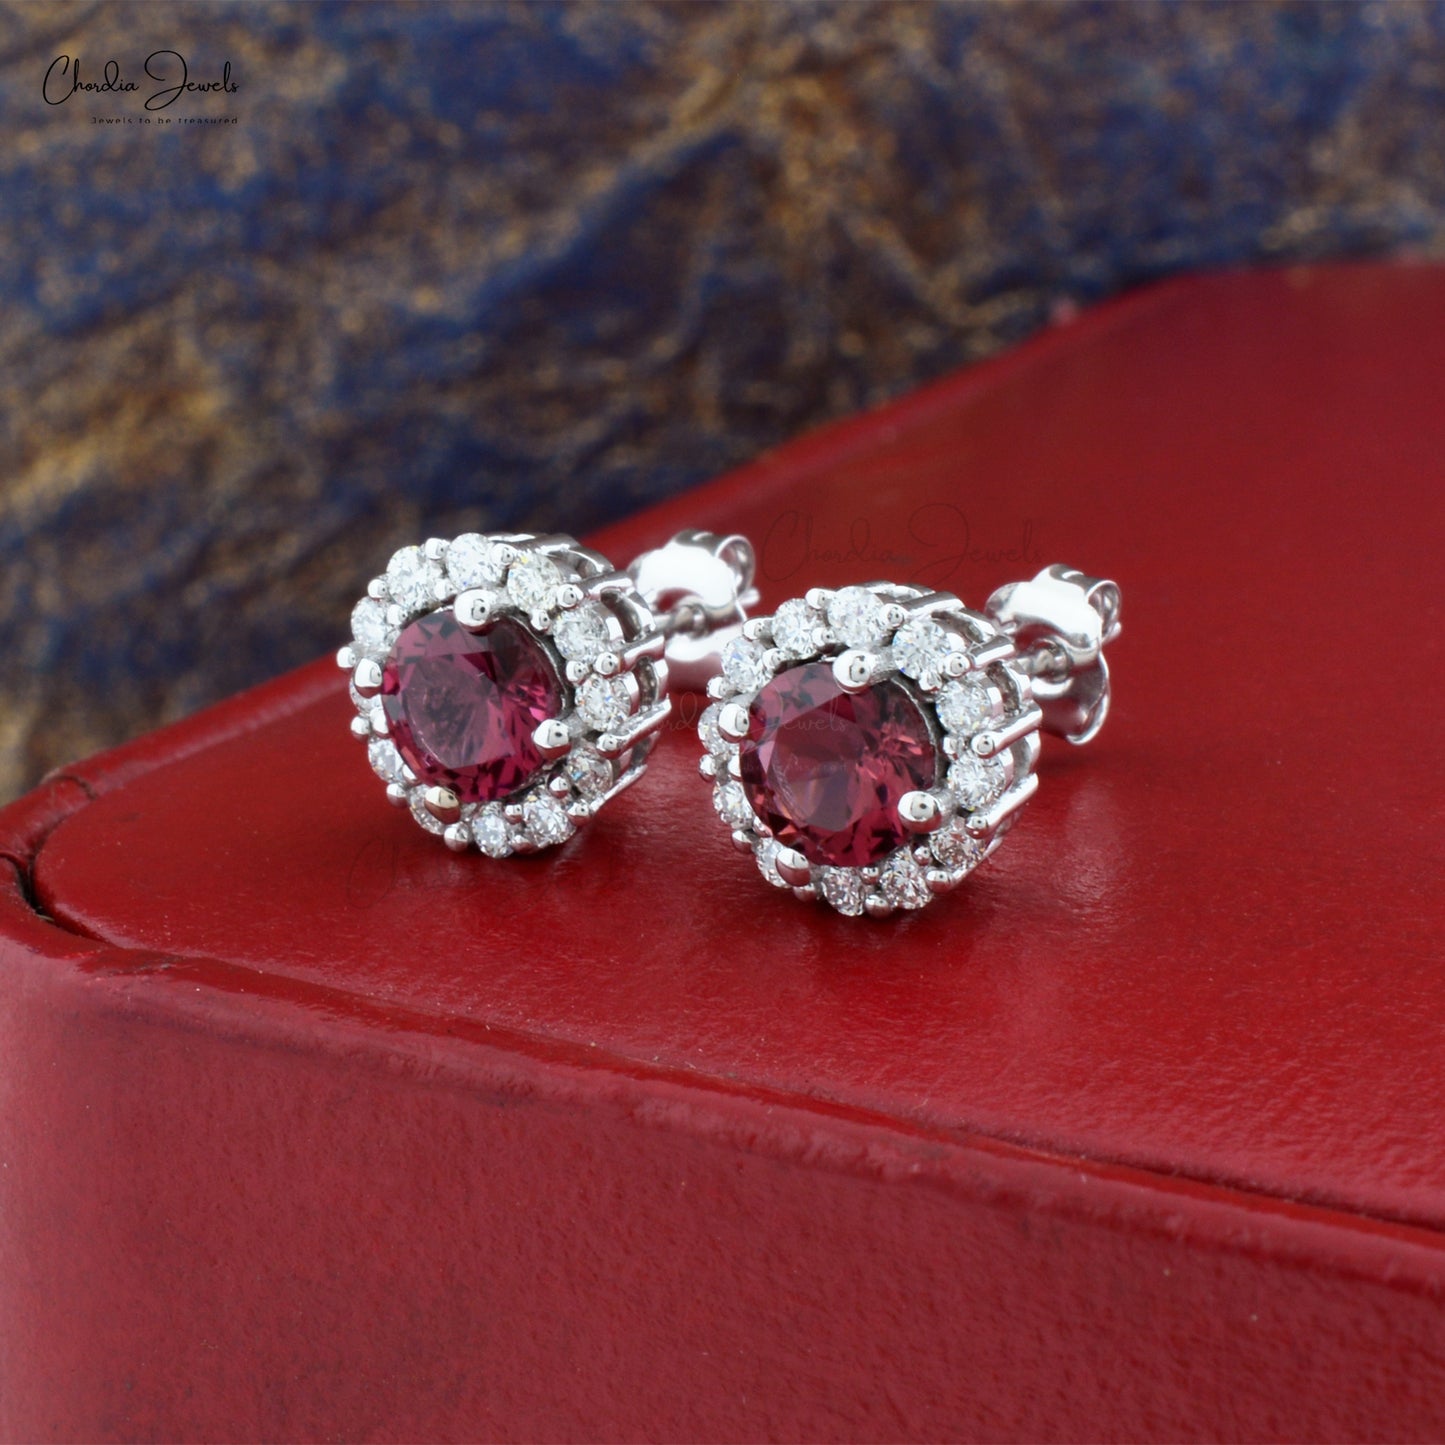 Halo Stud Earrings With Pink Tourmaline Gemstones Real 14k White Gold Diamond Accented Studs